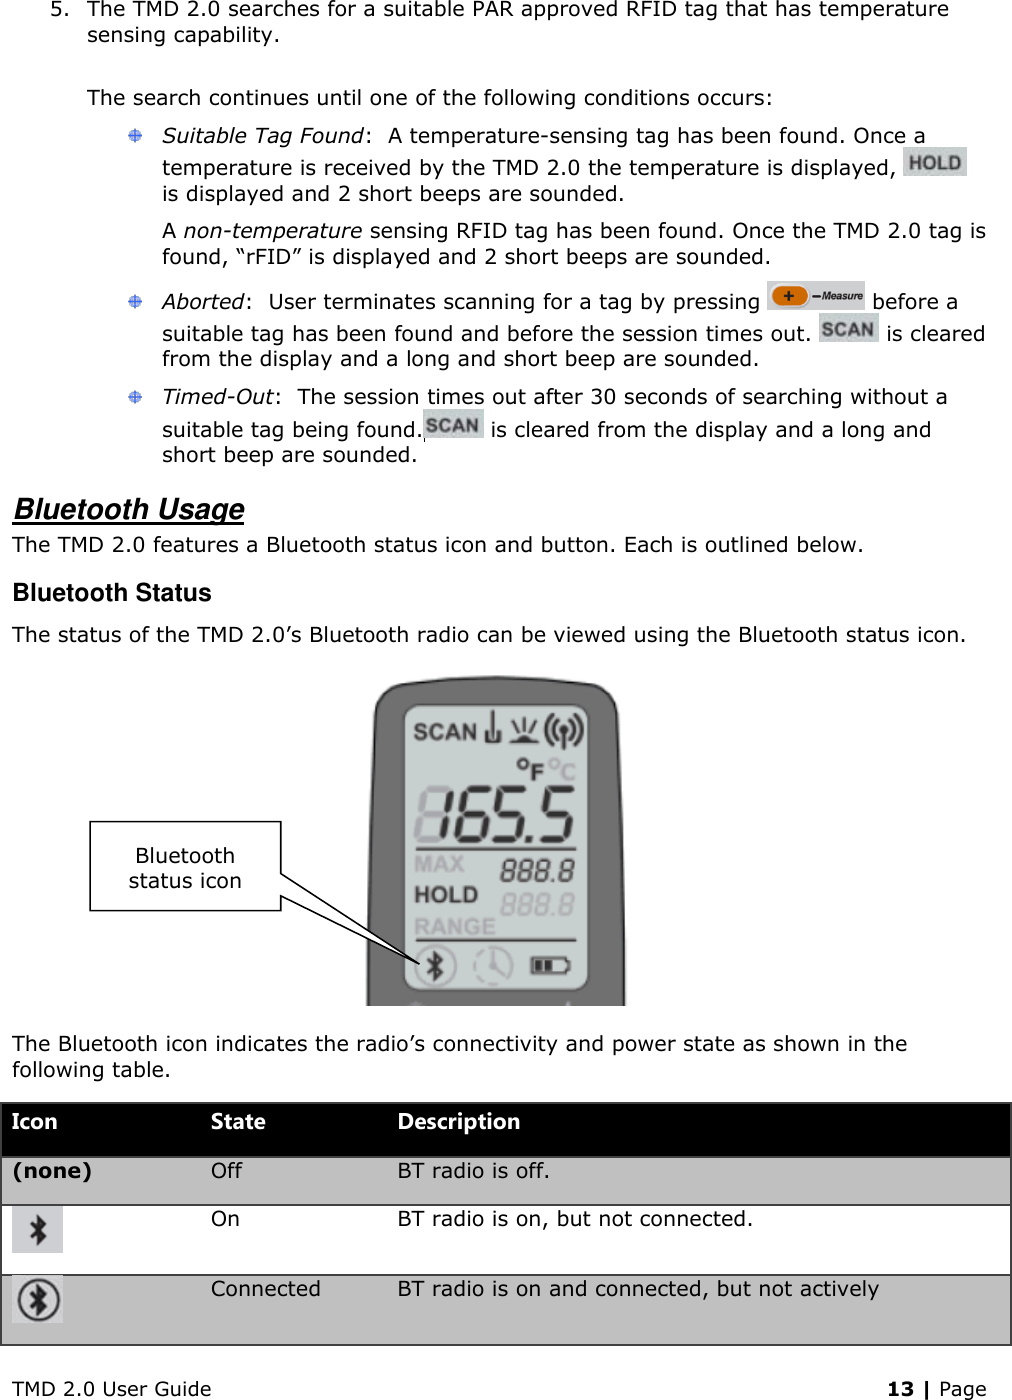 TMD 2.0 User Guide    13 | Page 5. The TMD 2.0 searches for a suitable PAR approved RFID tag that has temperature sensing capability.  The search continues until one of the following conditions occurs:  Suitable Tag Found:  A temperature-sensing tag has been found. Once a temperature is received by the TMD 2.0 the temperature is displayed,   is displayed and 2 short beeps are sounded. A non-temperature sensing RFID tag has been found. Once the TMD 2.0 tag is found, “rFID” is displayed and 2 short beeps are sounded.  Aborted:  User terminates scanning for a tag by pressing   before a suitable tag has been found and before the session times out.   is cleared from the display and a long and short beep are sounded.  Timed-Out:  The session times out after 30 seconds of searching without a suitable tag being found.  is cleared from the display and a long and short beep are sounded.  Bluetooth Usage The TMD 2.0 features a Bluetooth status icon and button. Each is outlined below. Bluetooth Status The status of the TMD 2.0’s Bluetooth radio can be viewed using the Bluetooth status icon.  The Bluetooth icon indicates the radio’s connectivity and power state as shown in the following table. Icon State Description (none) Off BT radio is off.  On BT radio is on, but not connected.  Connected BT radio is on and connected, but not actively Bluetooth status icon 